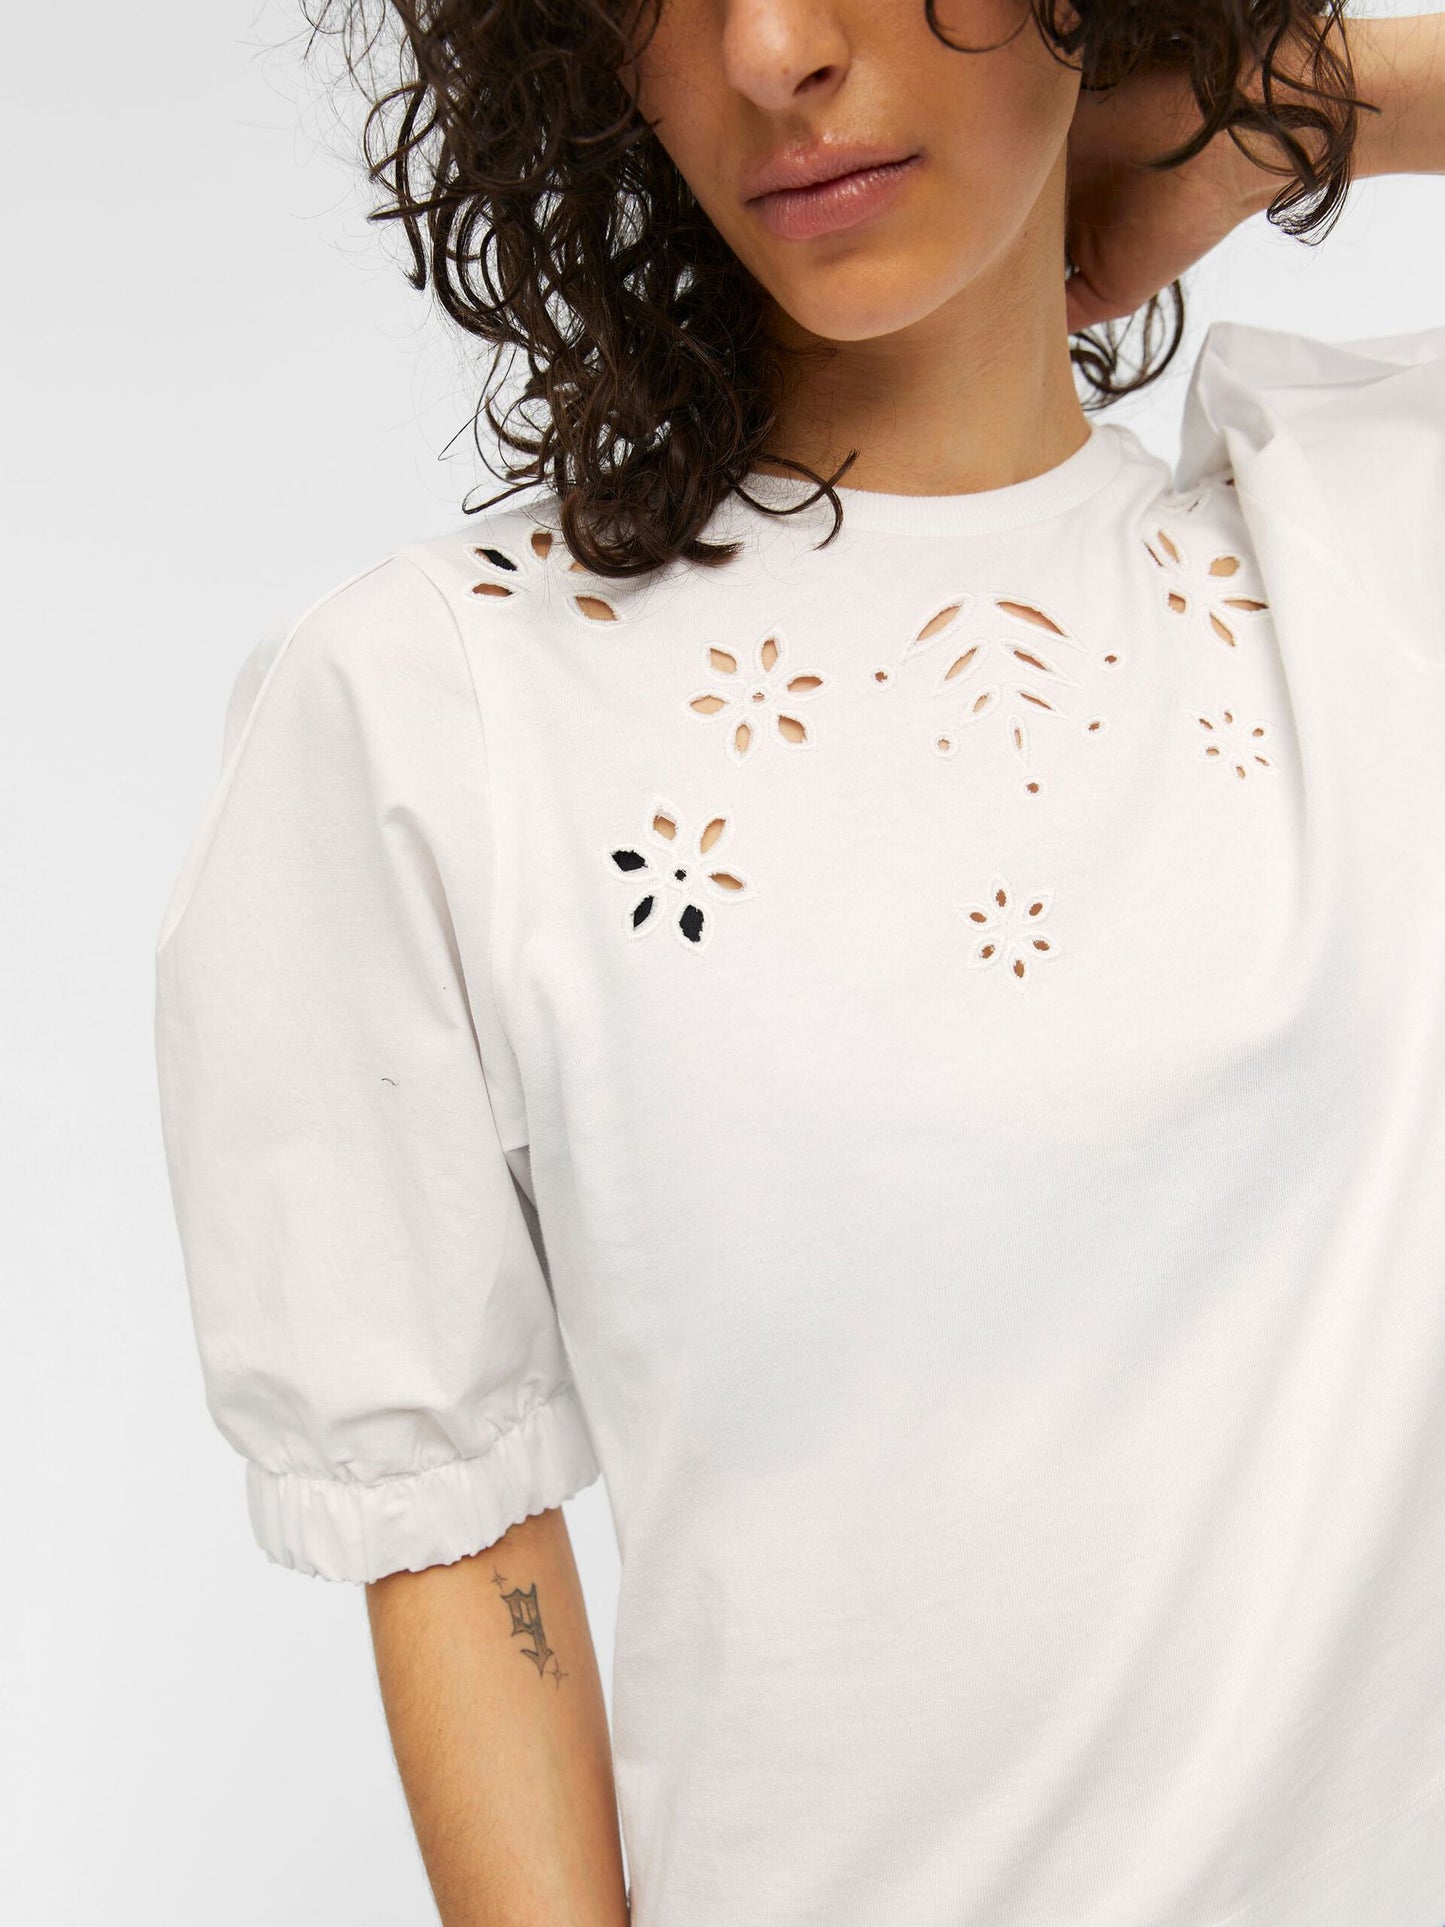 Object - Half Sleeved Top - 23042648